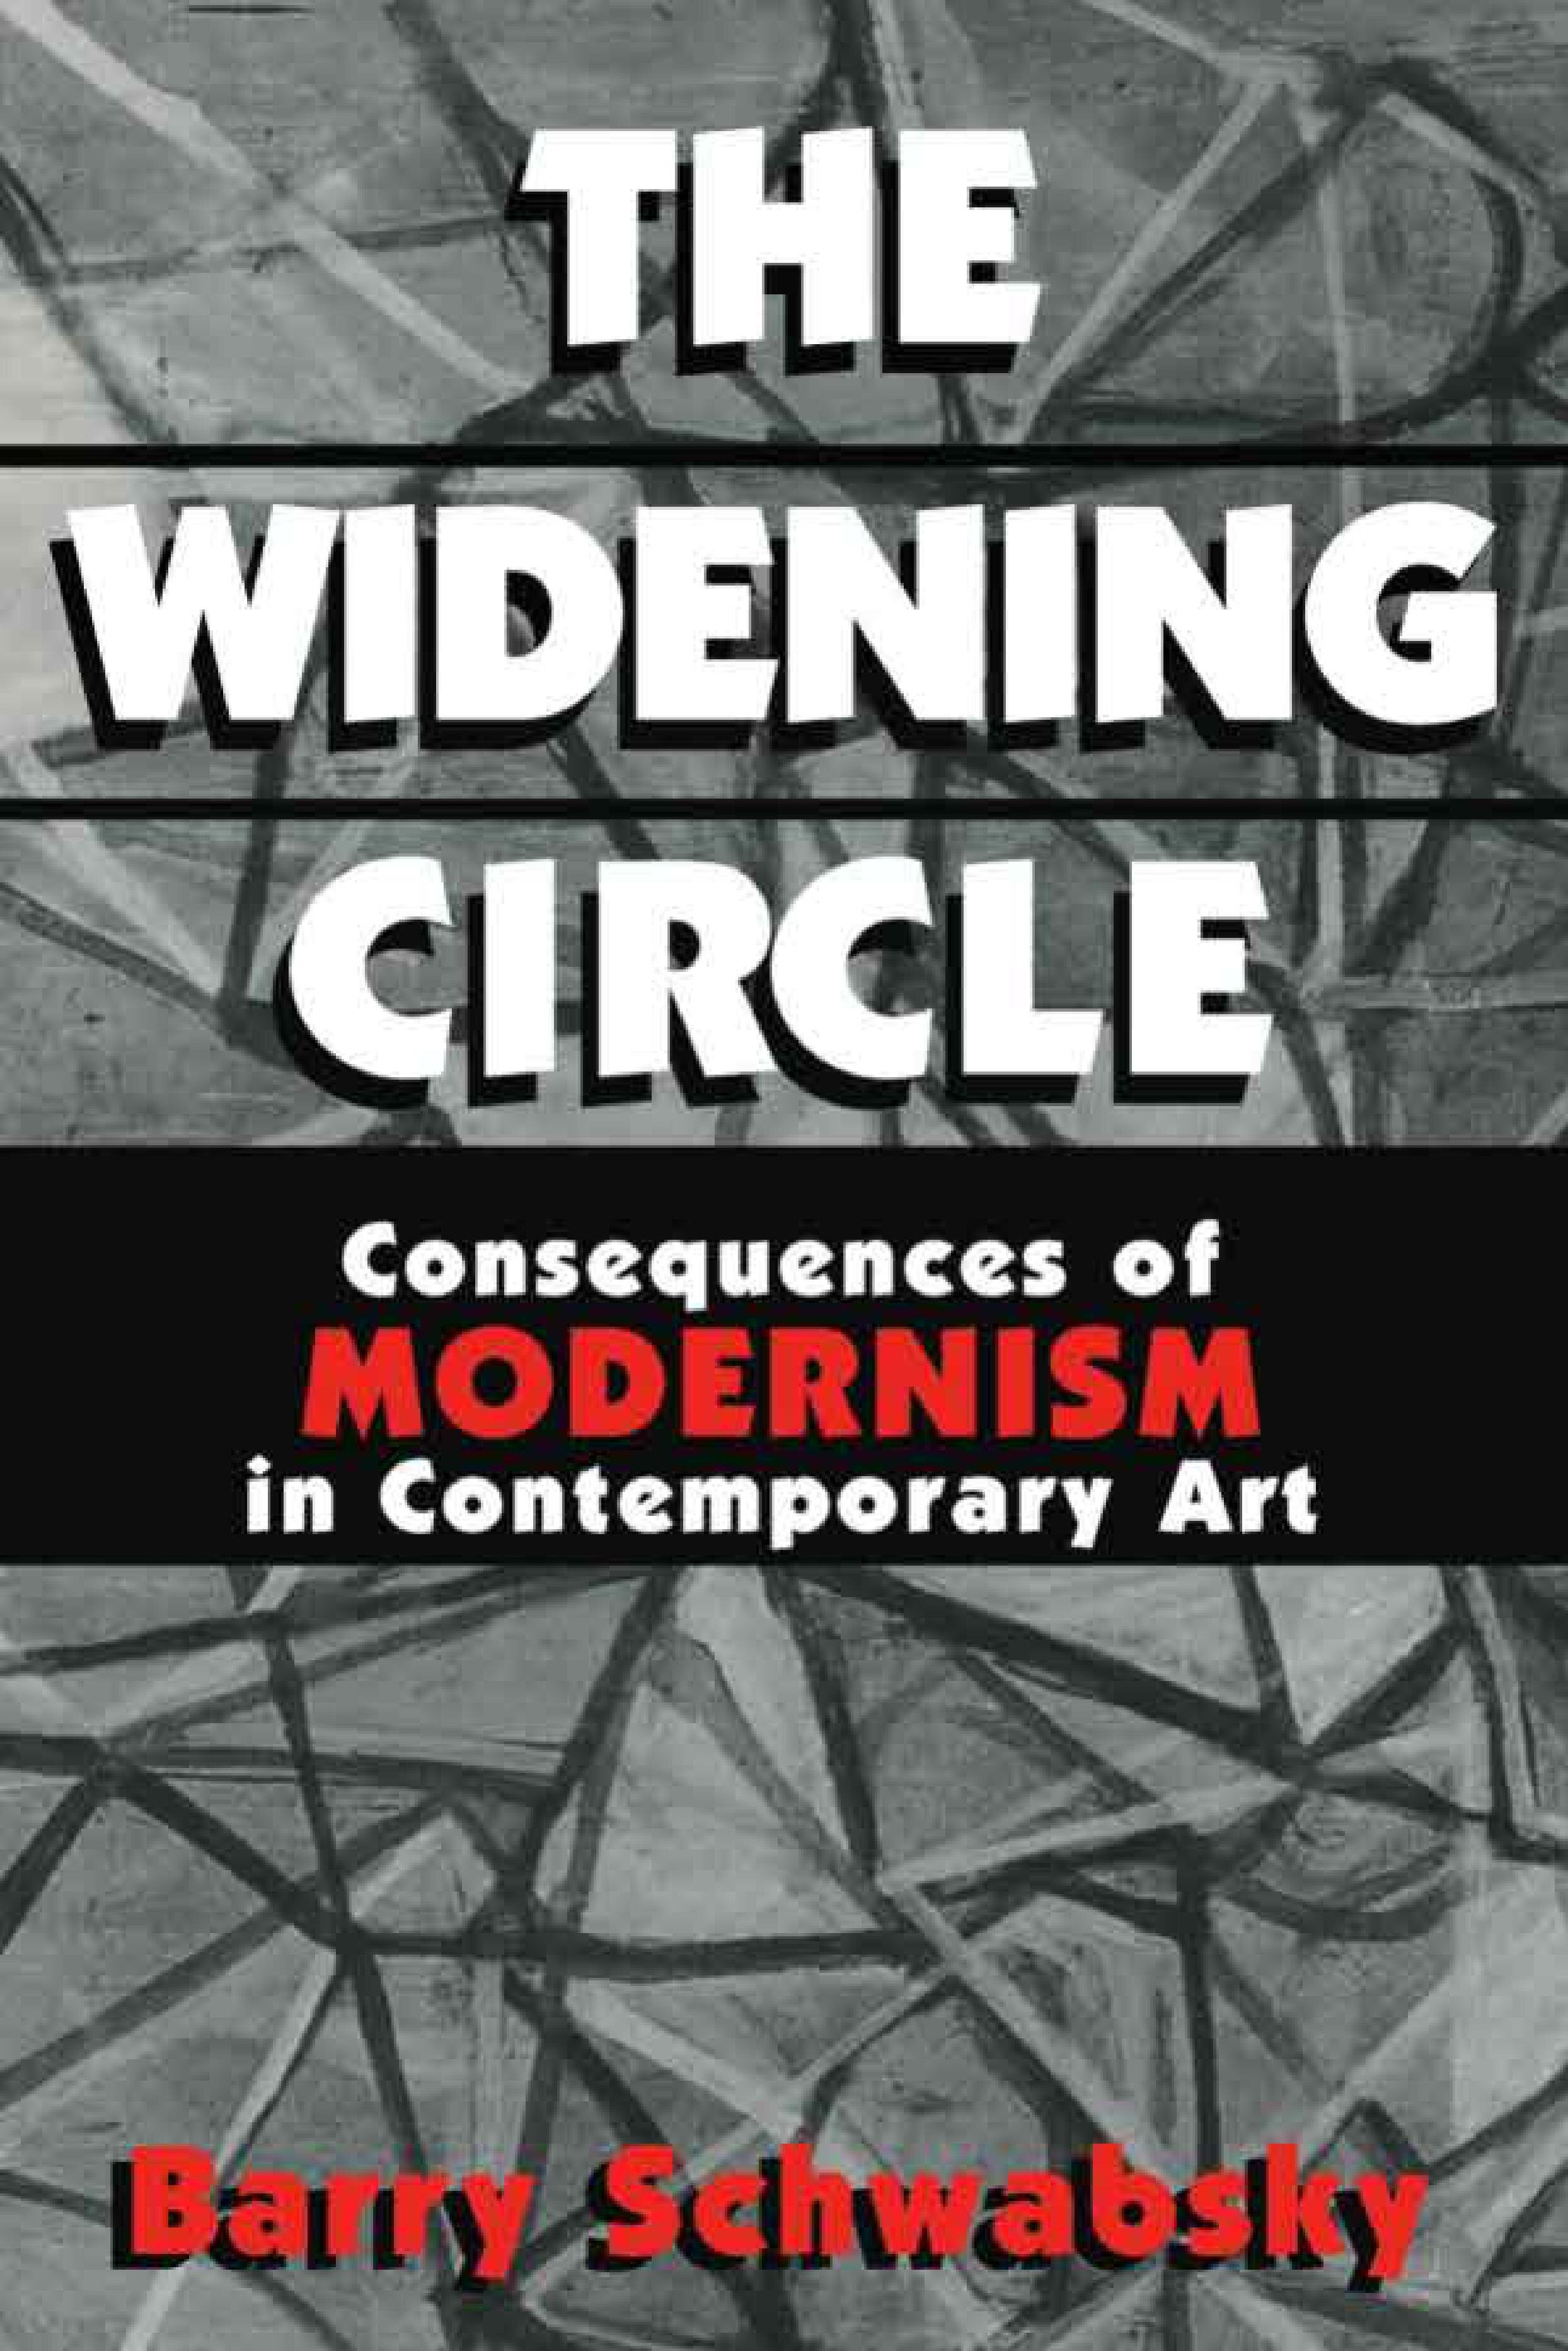 The Widening Circle: The Consequences of Modernism in Contemporary Art by Barry Schwabsky 